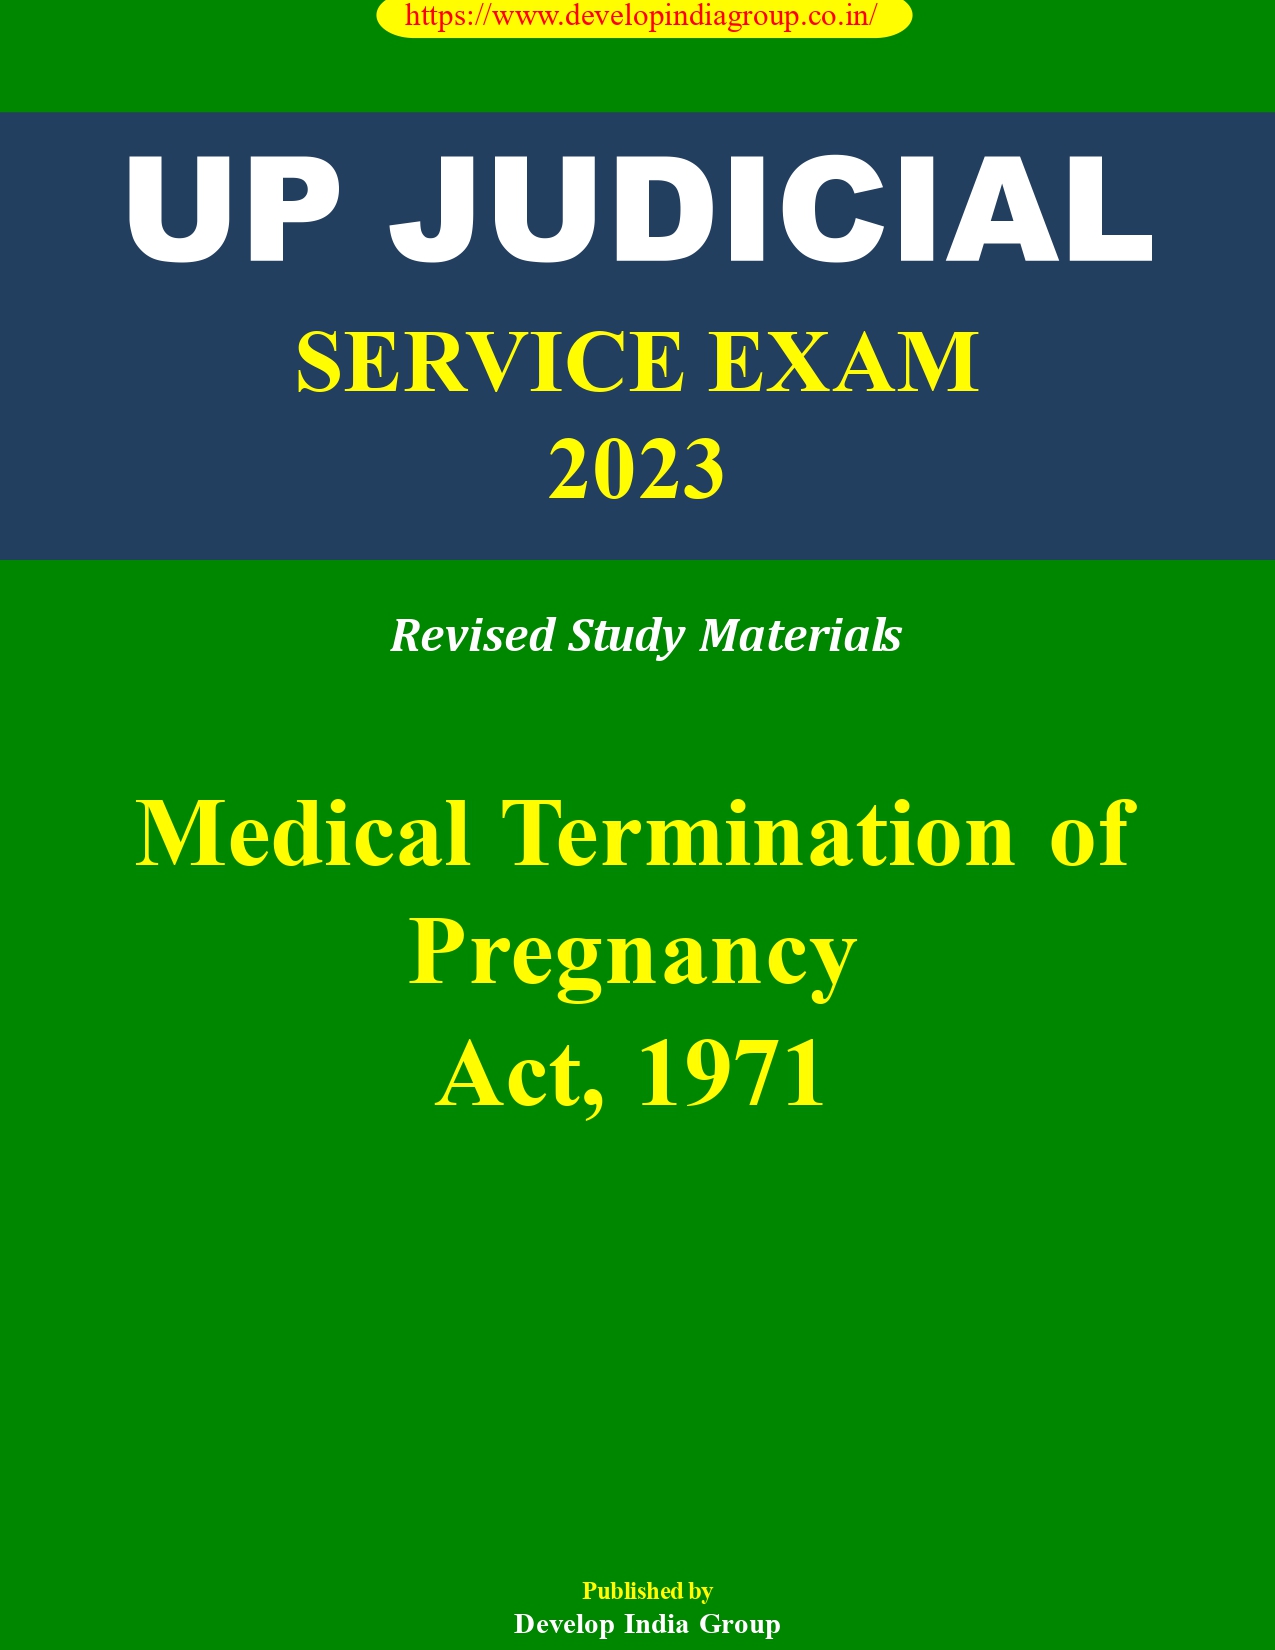 Medical Termination of Pregnancy Act, 1971 sample_page-0001